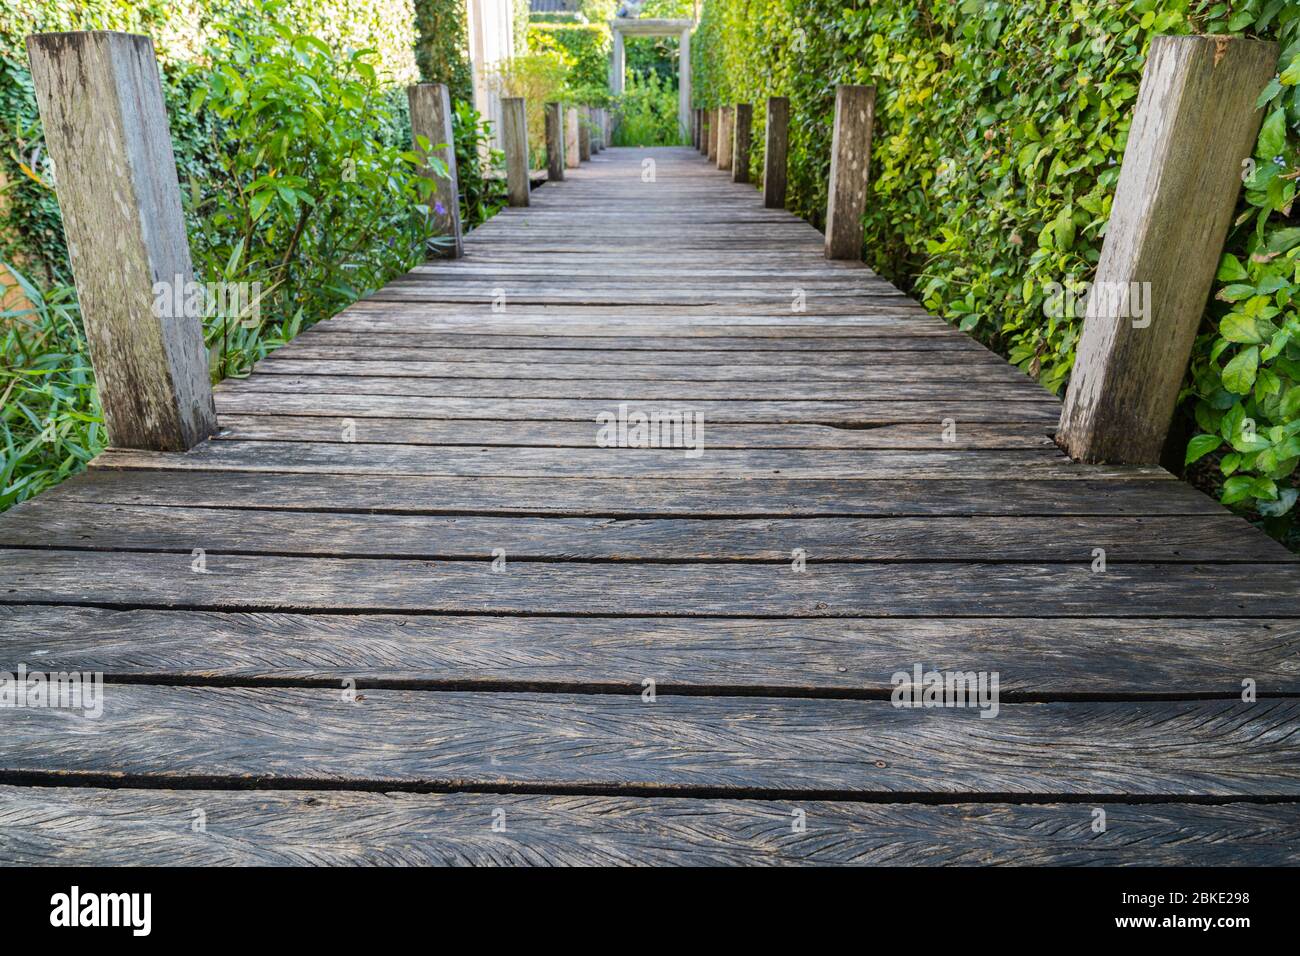 Wooden pathway on the garden with green trees background. Stock Photo